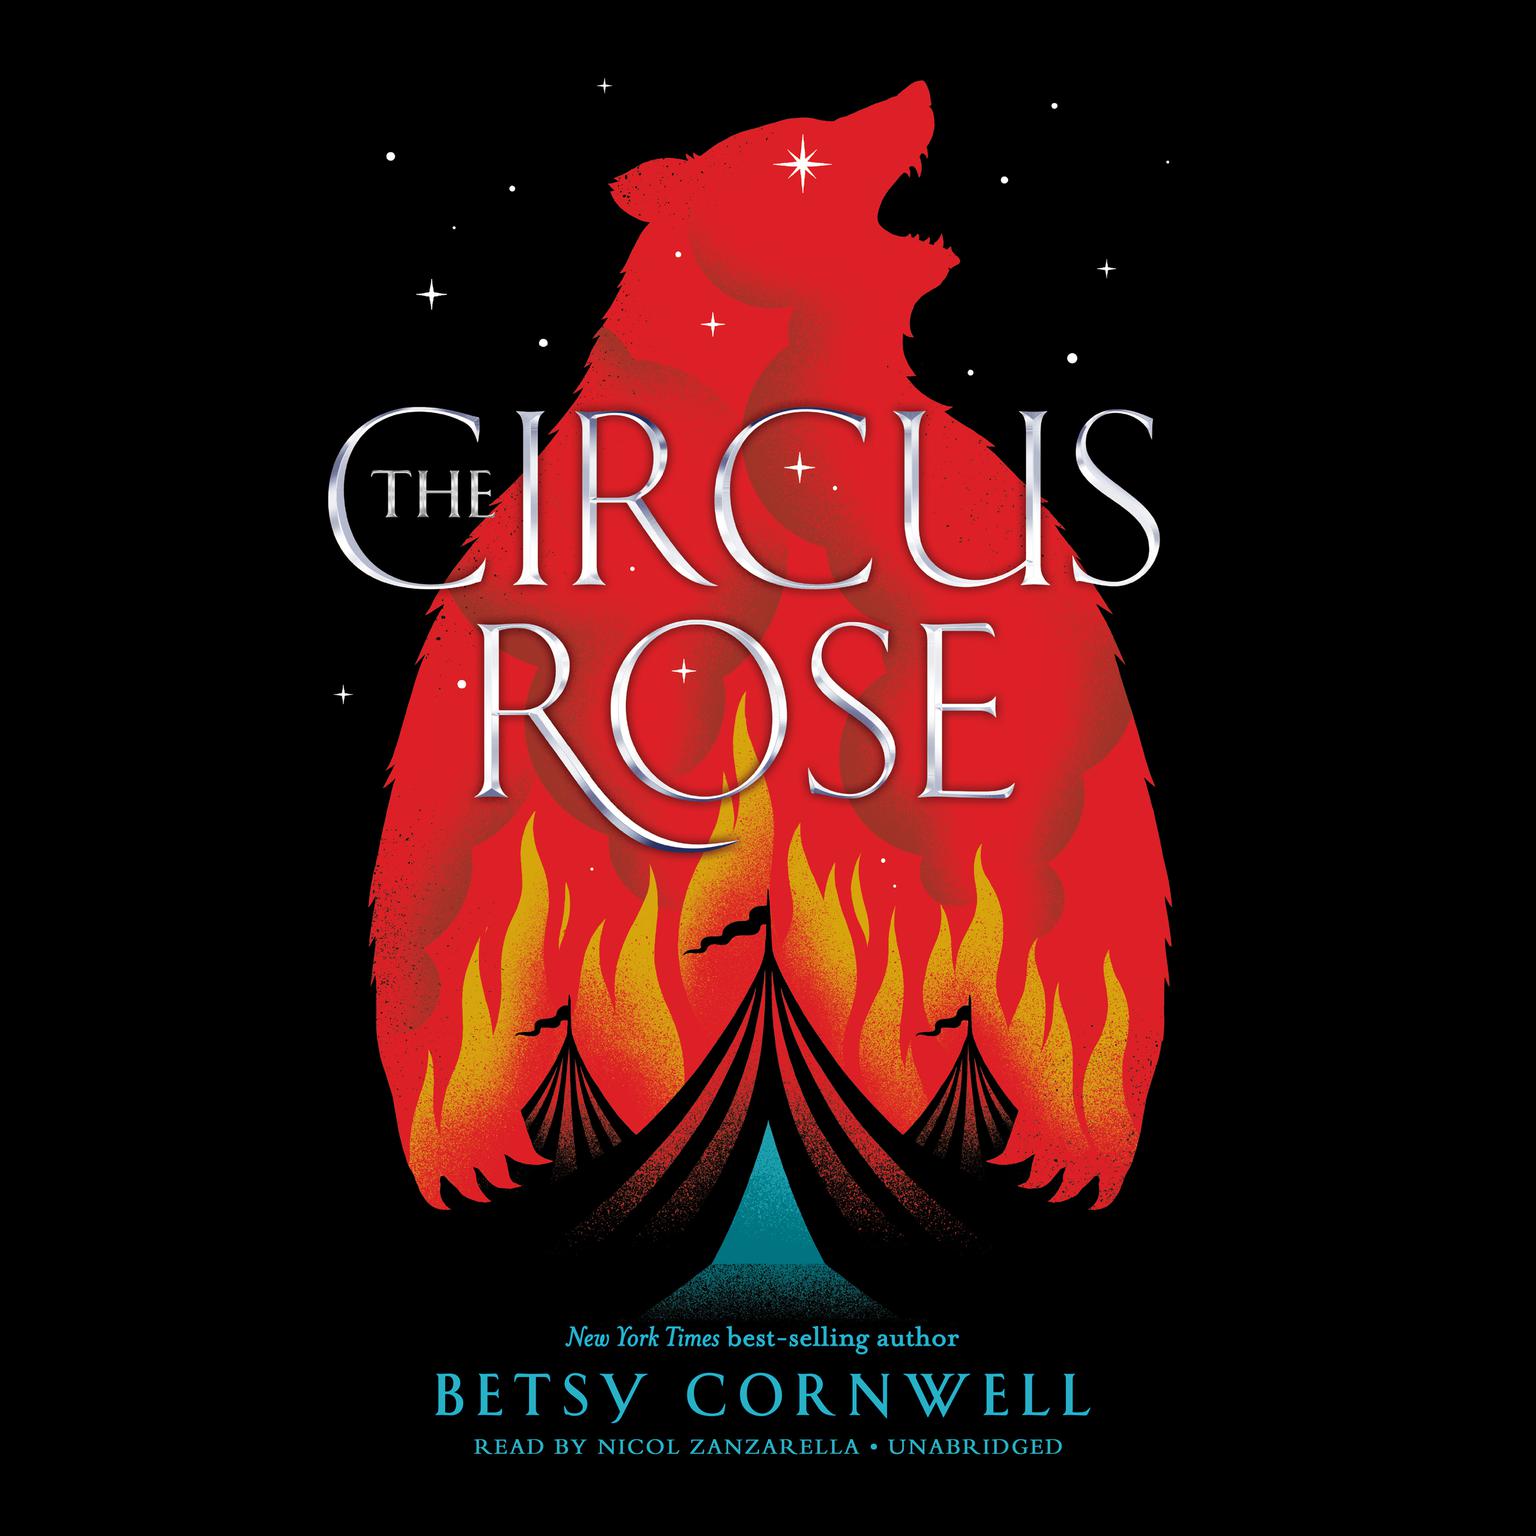 The Circus Rose Audiobook, by Betsy Cornwell